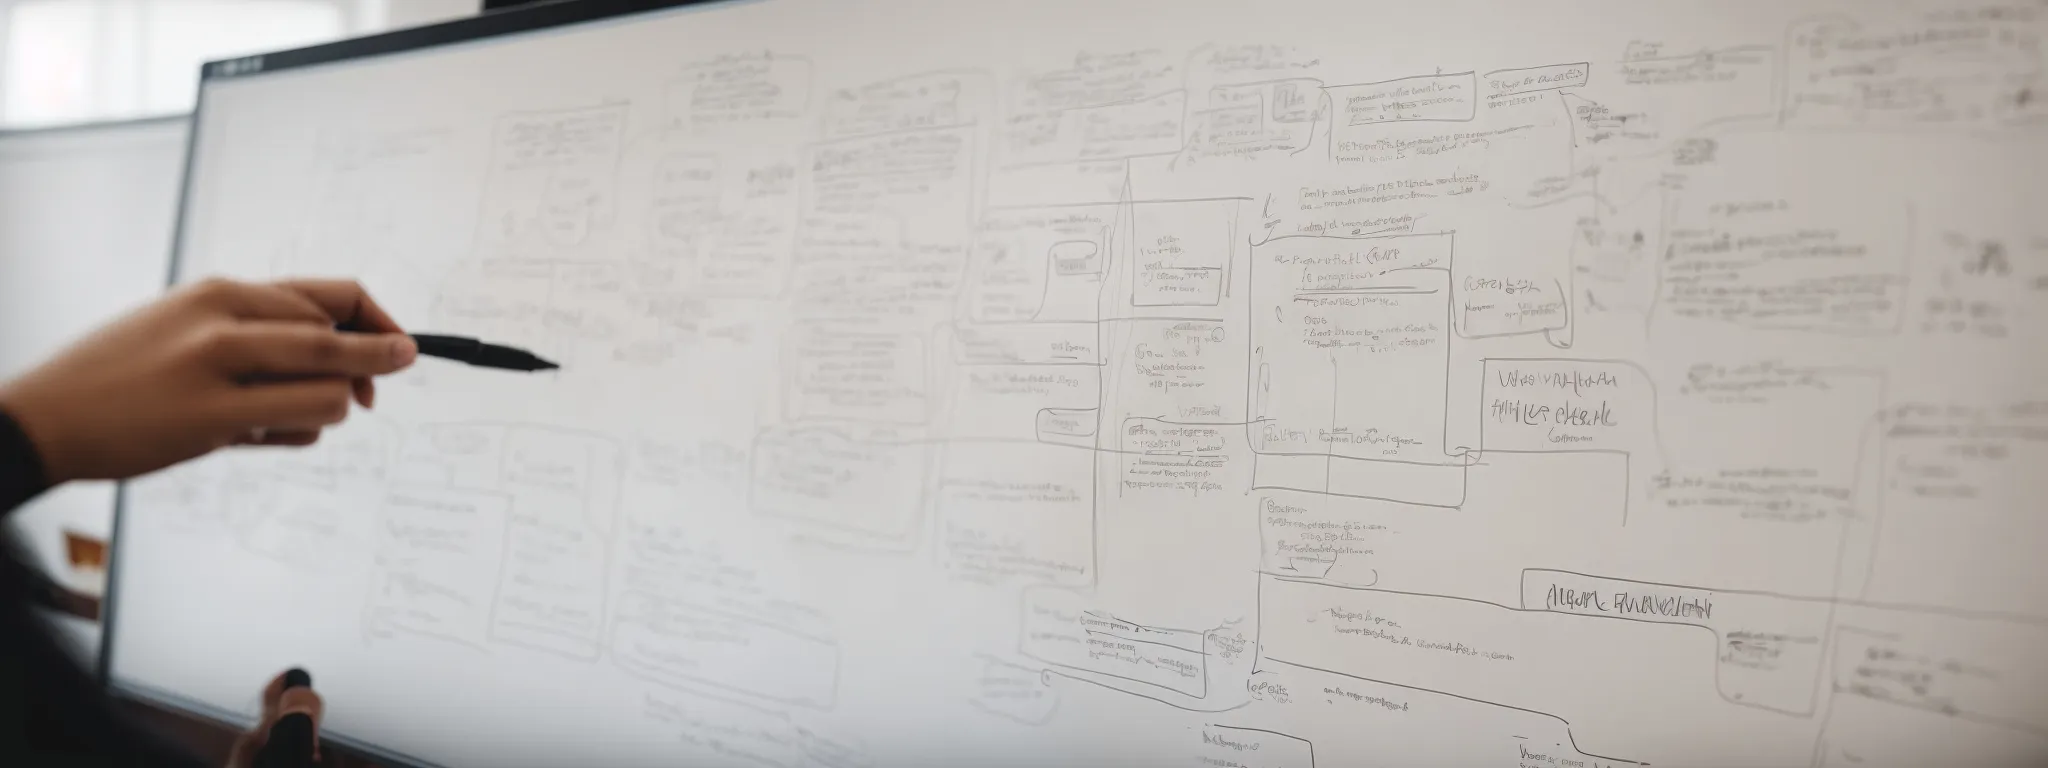 an individual sketches a website layout on a whiteboard, highlighting areas for content and seo strategy alignment.